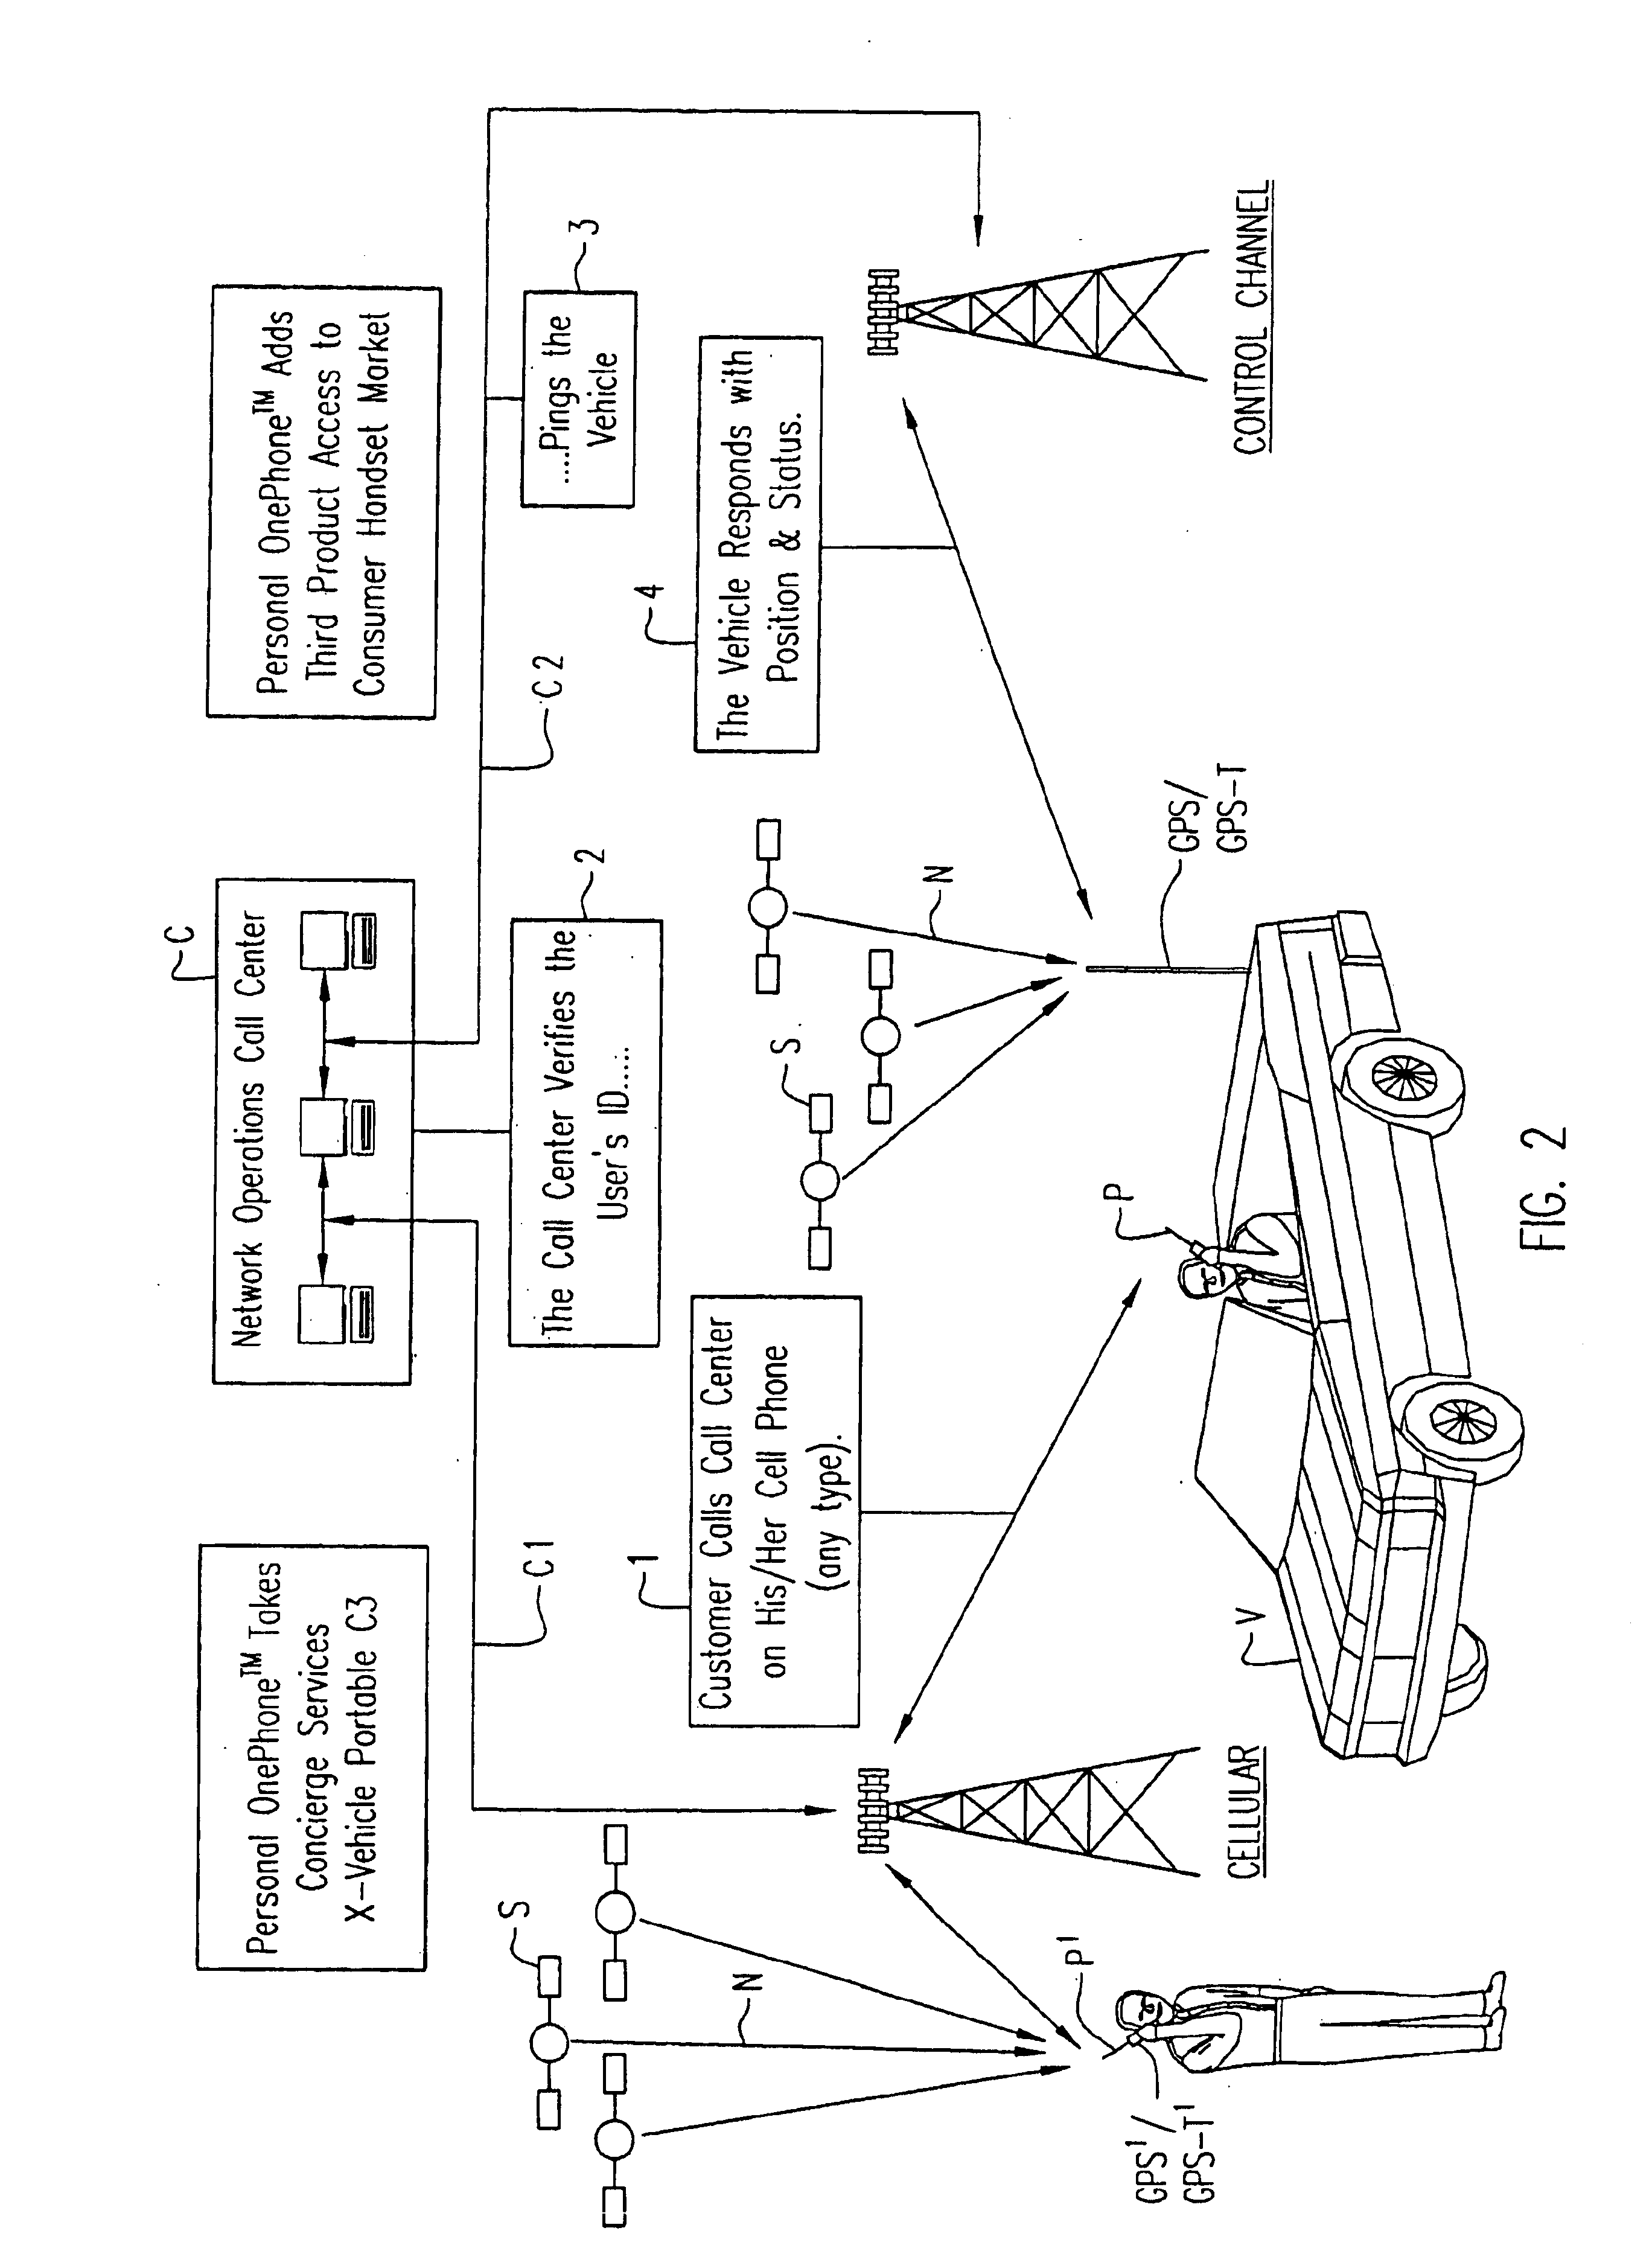 Methods of and system for portable cellular phone voice communication and positional location data communication using the cellular phone network control channel